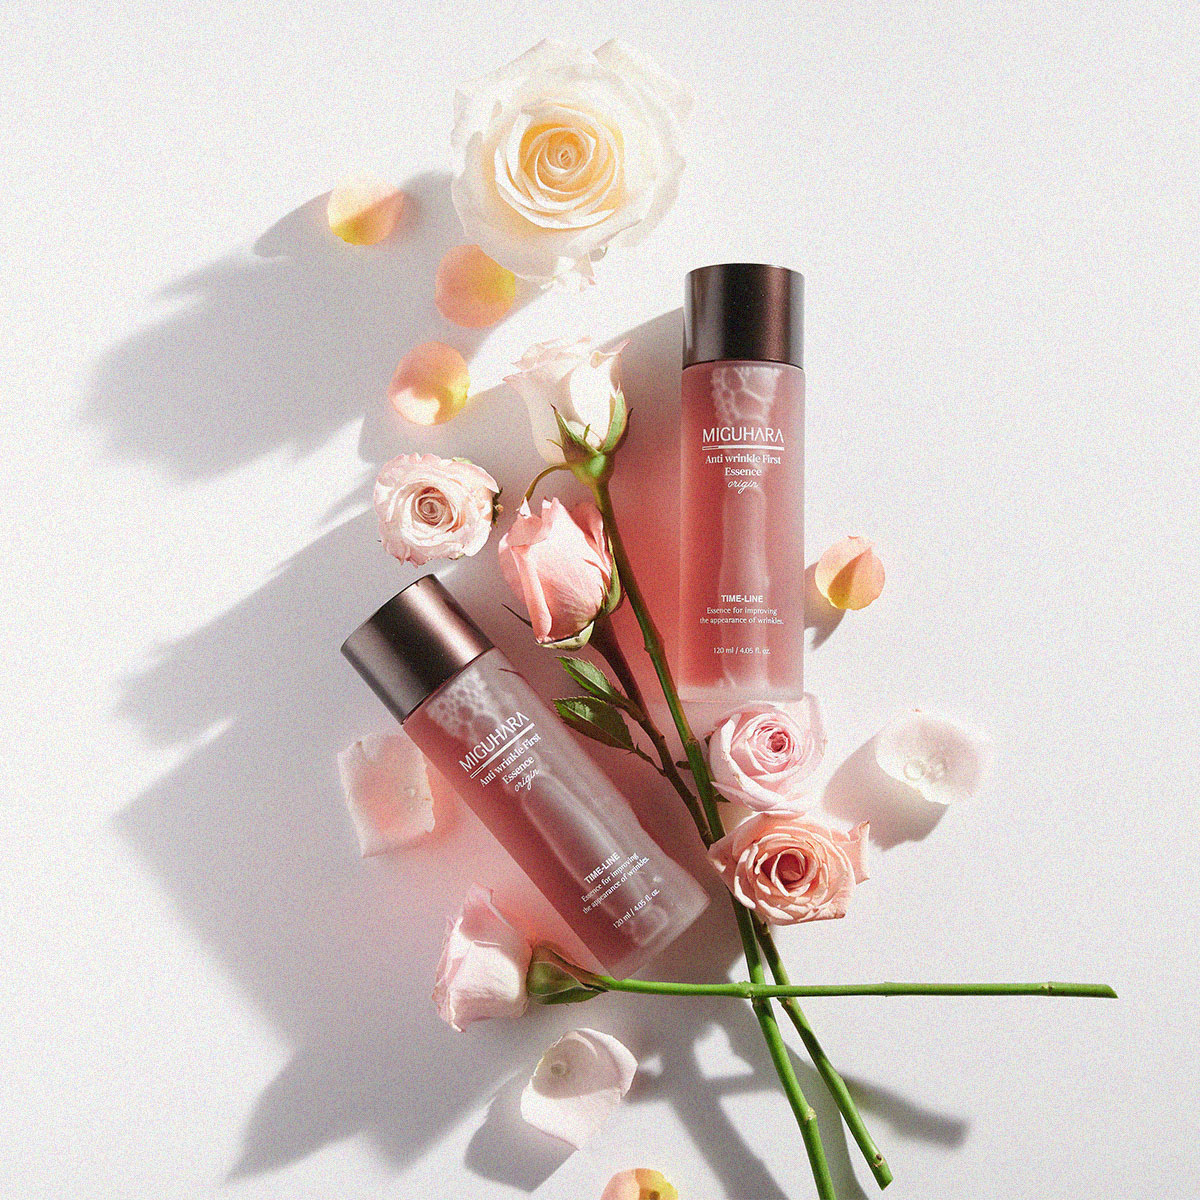 RECOVER
Life energy from nature🌿

Ultra Whitening First Essence Origin❤️

#rose #rosewater #roseextract #rosewesternwater #antiwrinkle #antiaging #antiagingline #miguhara #miguharamy #kbeauty #koreanskincare #korea #koreanbeauty